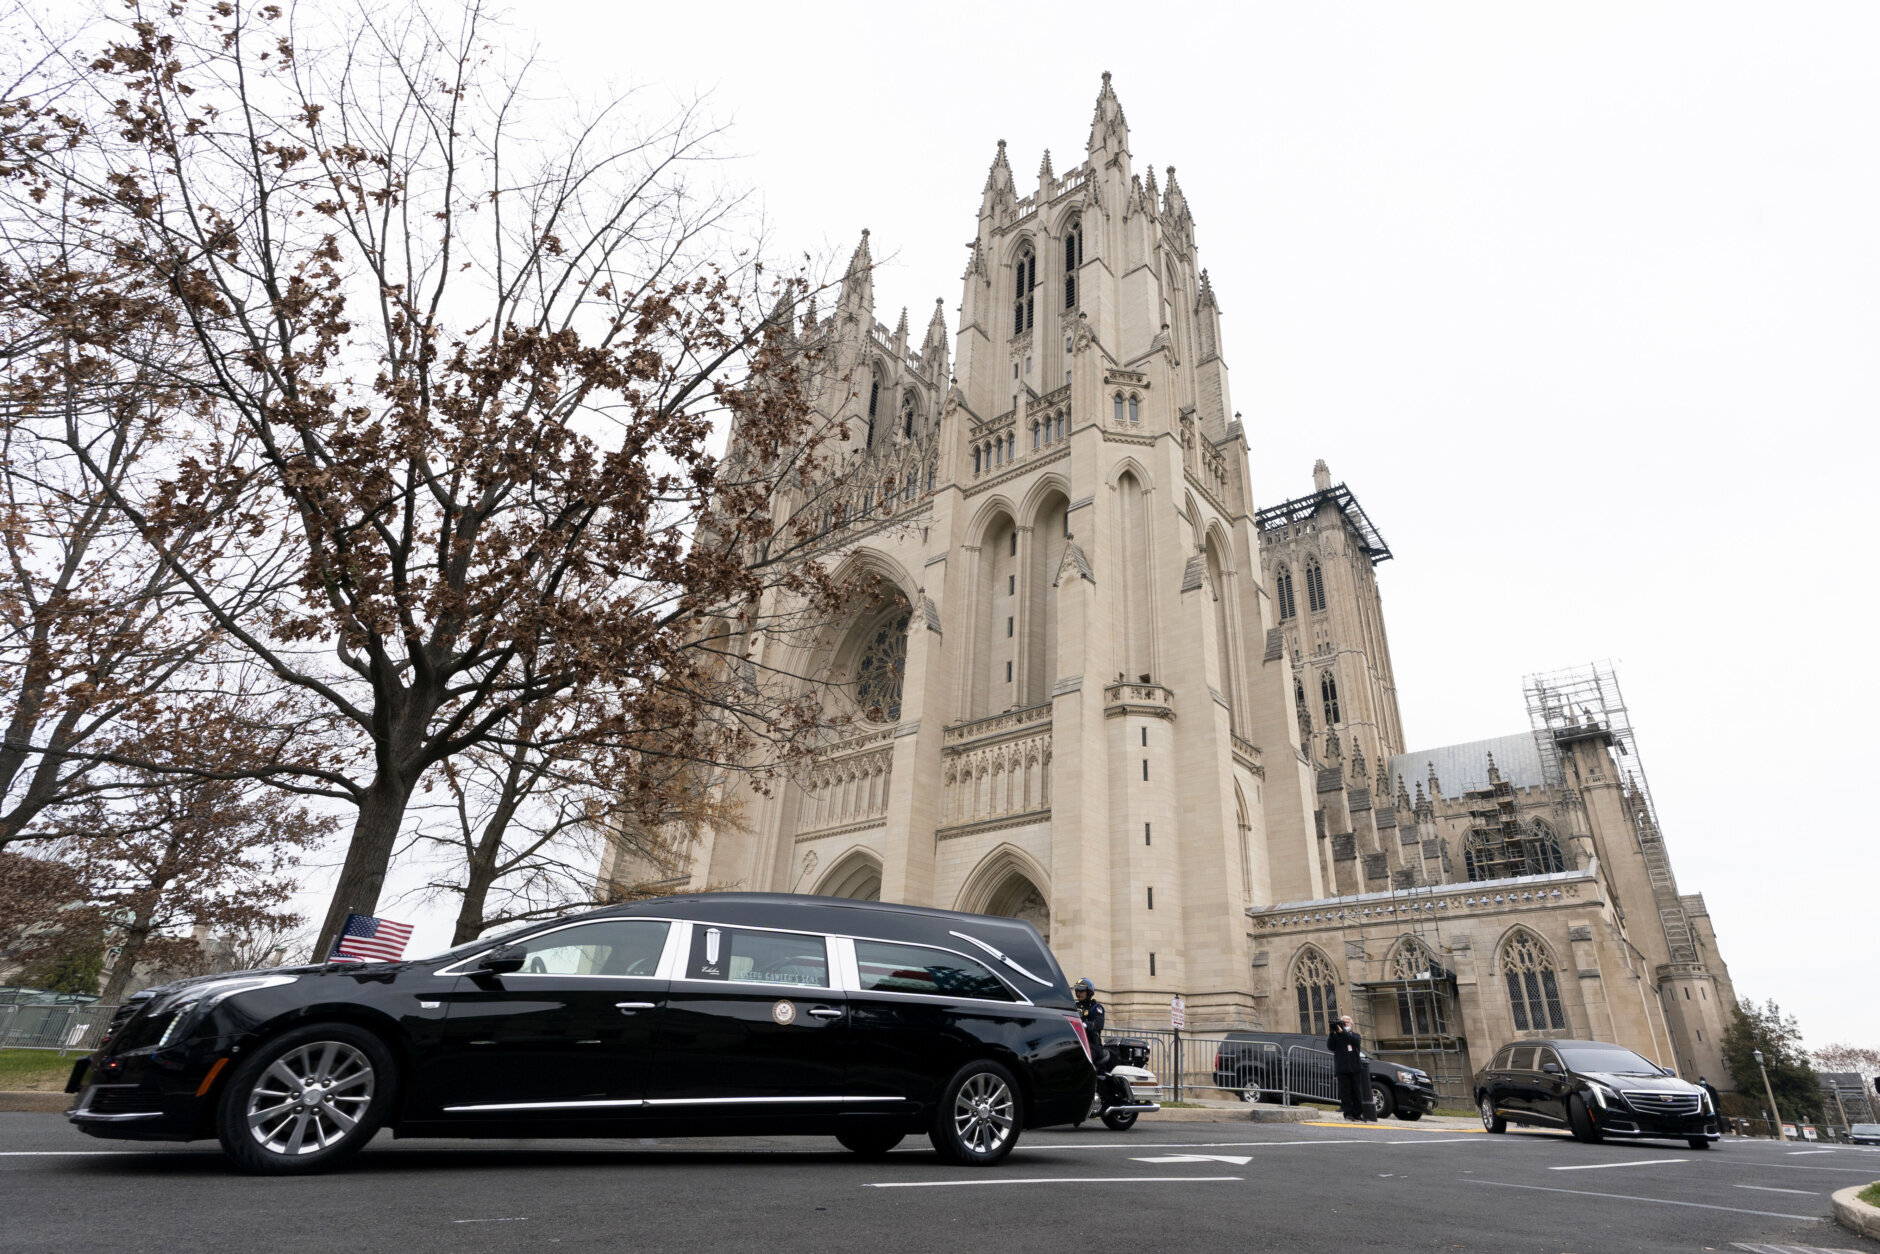 The hearse carrying the flag-draped casket of former Sen. Bob Dole of Kansas, leaves the Washington National Cathedral following a funeral service, Friday, Dec. 10, 2021, in Washington. (AP Photo/Manuel Balce Ceneta)